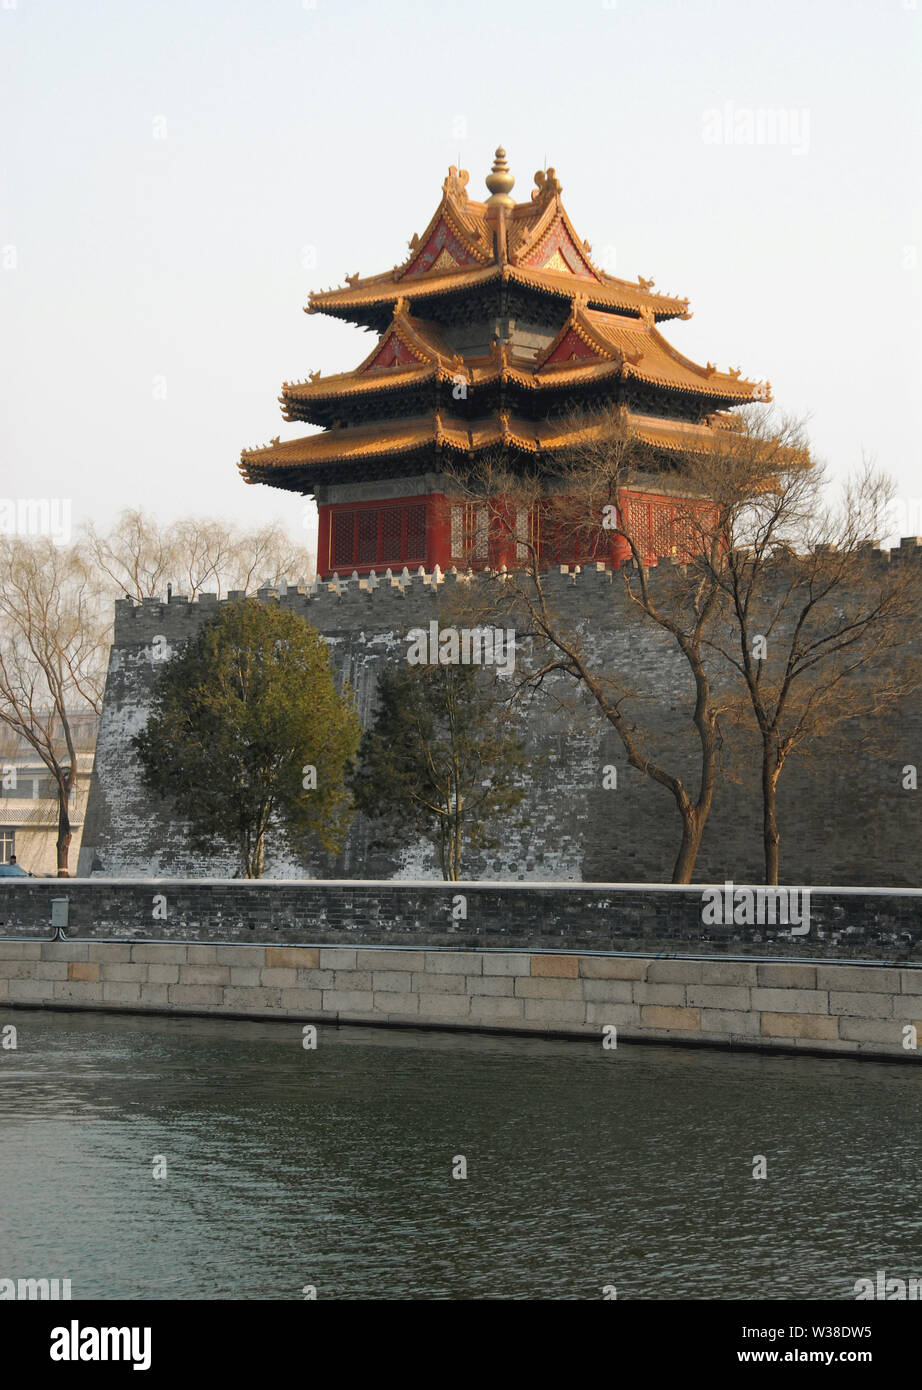 Forbidden City, Beijing, China. A corner tower seen from outside the Forbidden City. The Forbidden City has traditional Chinese architecture. UNESCO. Stock Photo